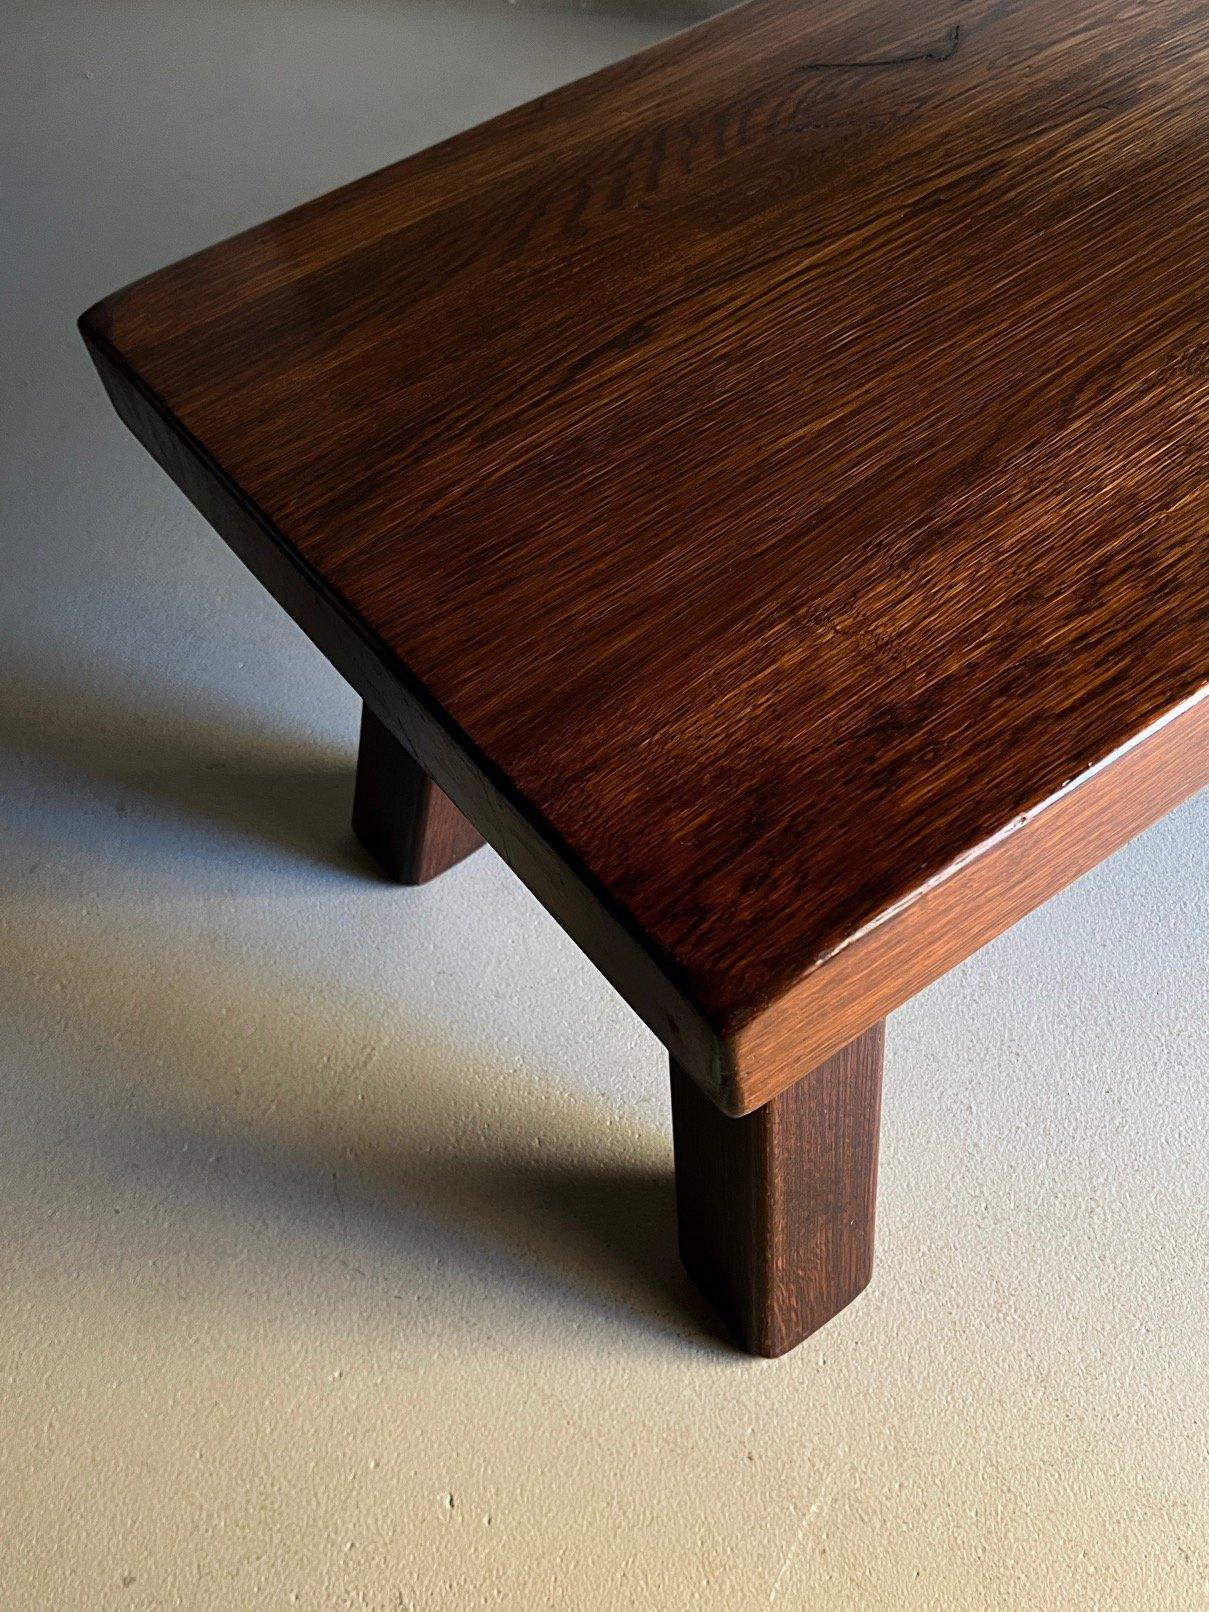 Brutalist Solid Oak Coffee Table, Netherlands, 1970s In Good Condition For Sale In Rīga, LV